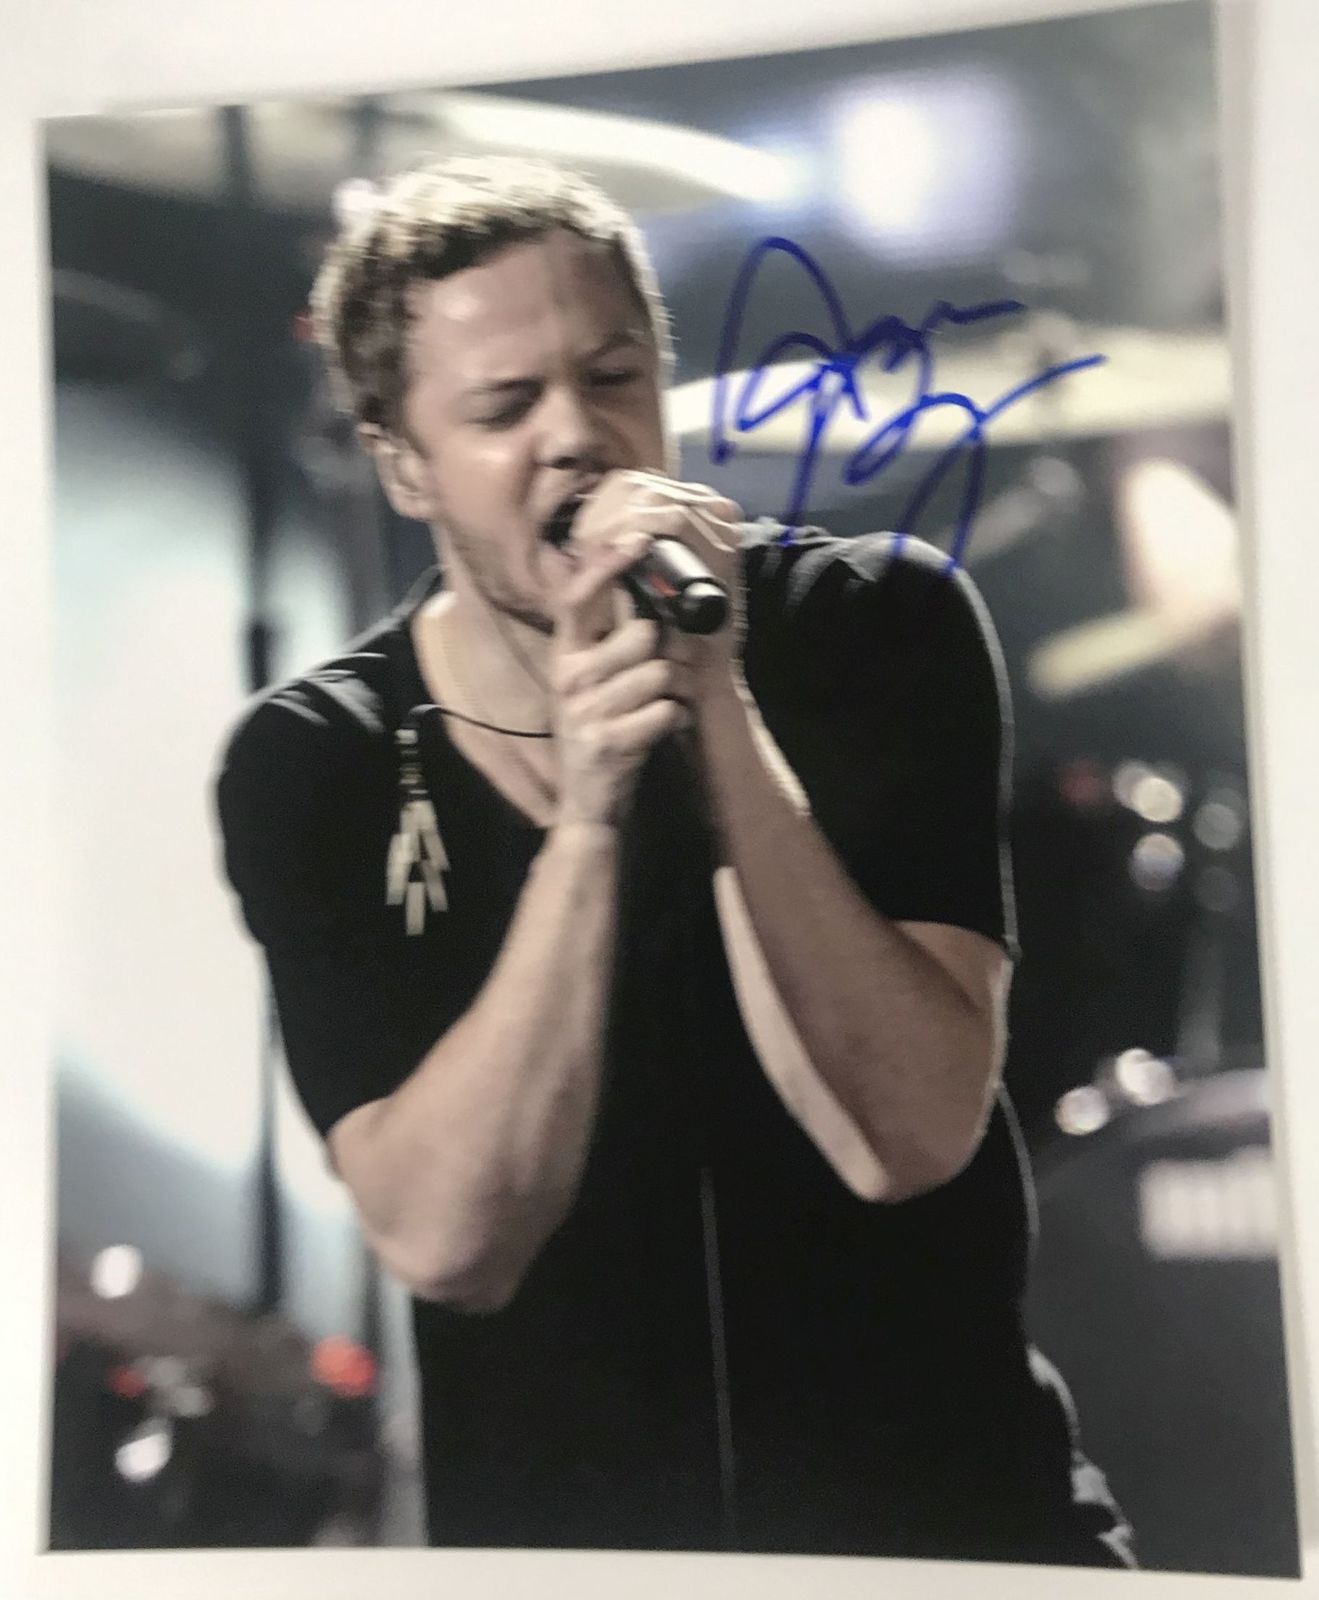 Primary image for Dan Reynolds Signed Autographed "Imagine Dragons" Glossy 8x10 Photo